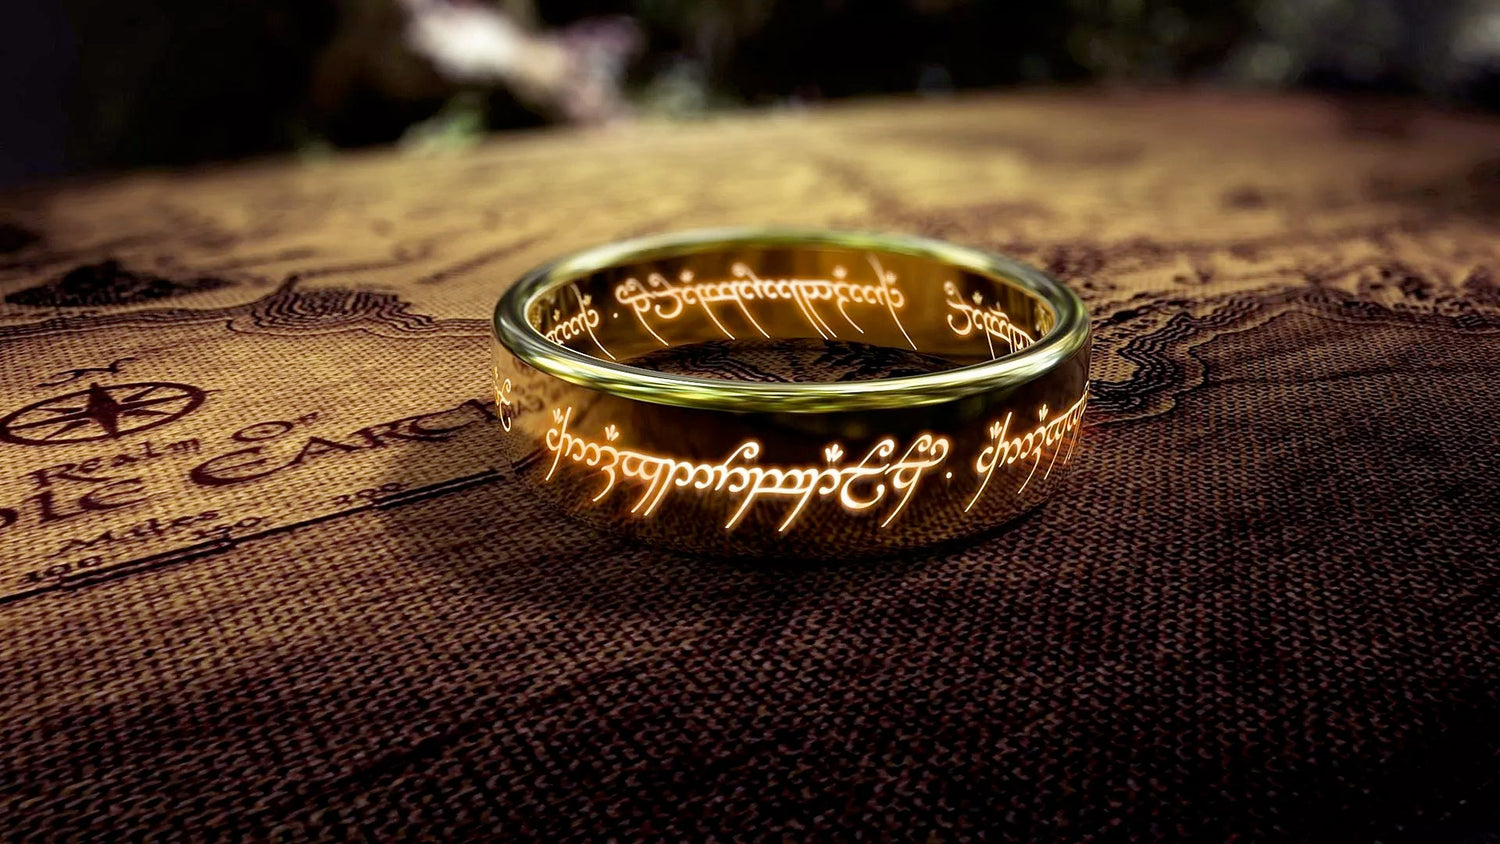 Amazon Unveils the First Image and Premiere Date for Its Upcoming Lord of the Rings Series